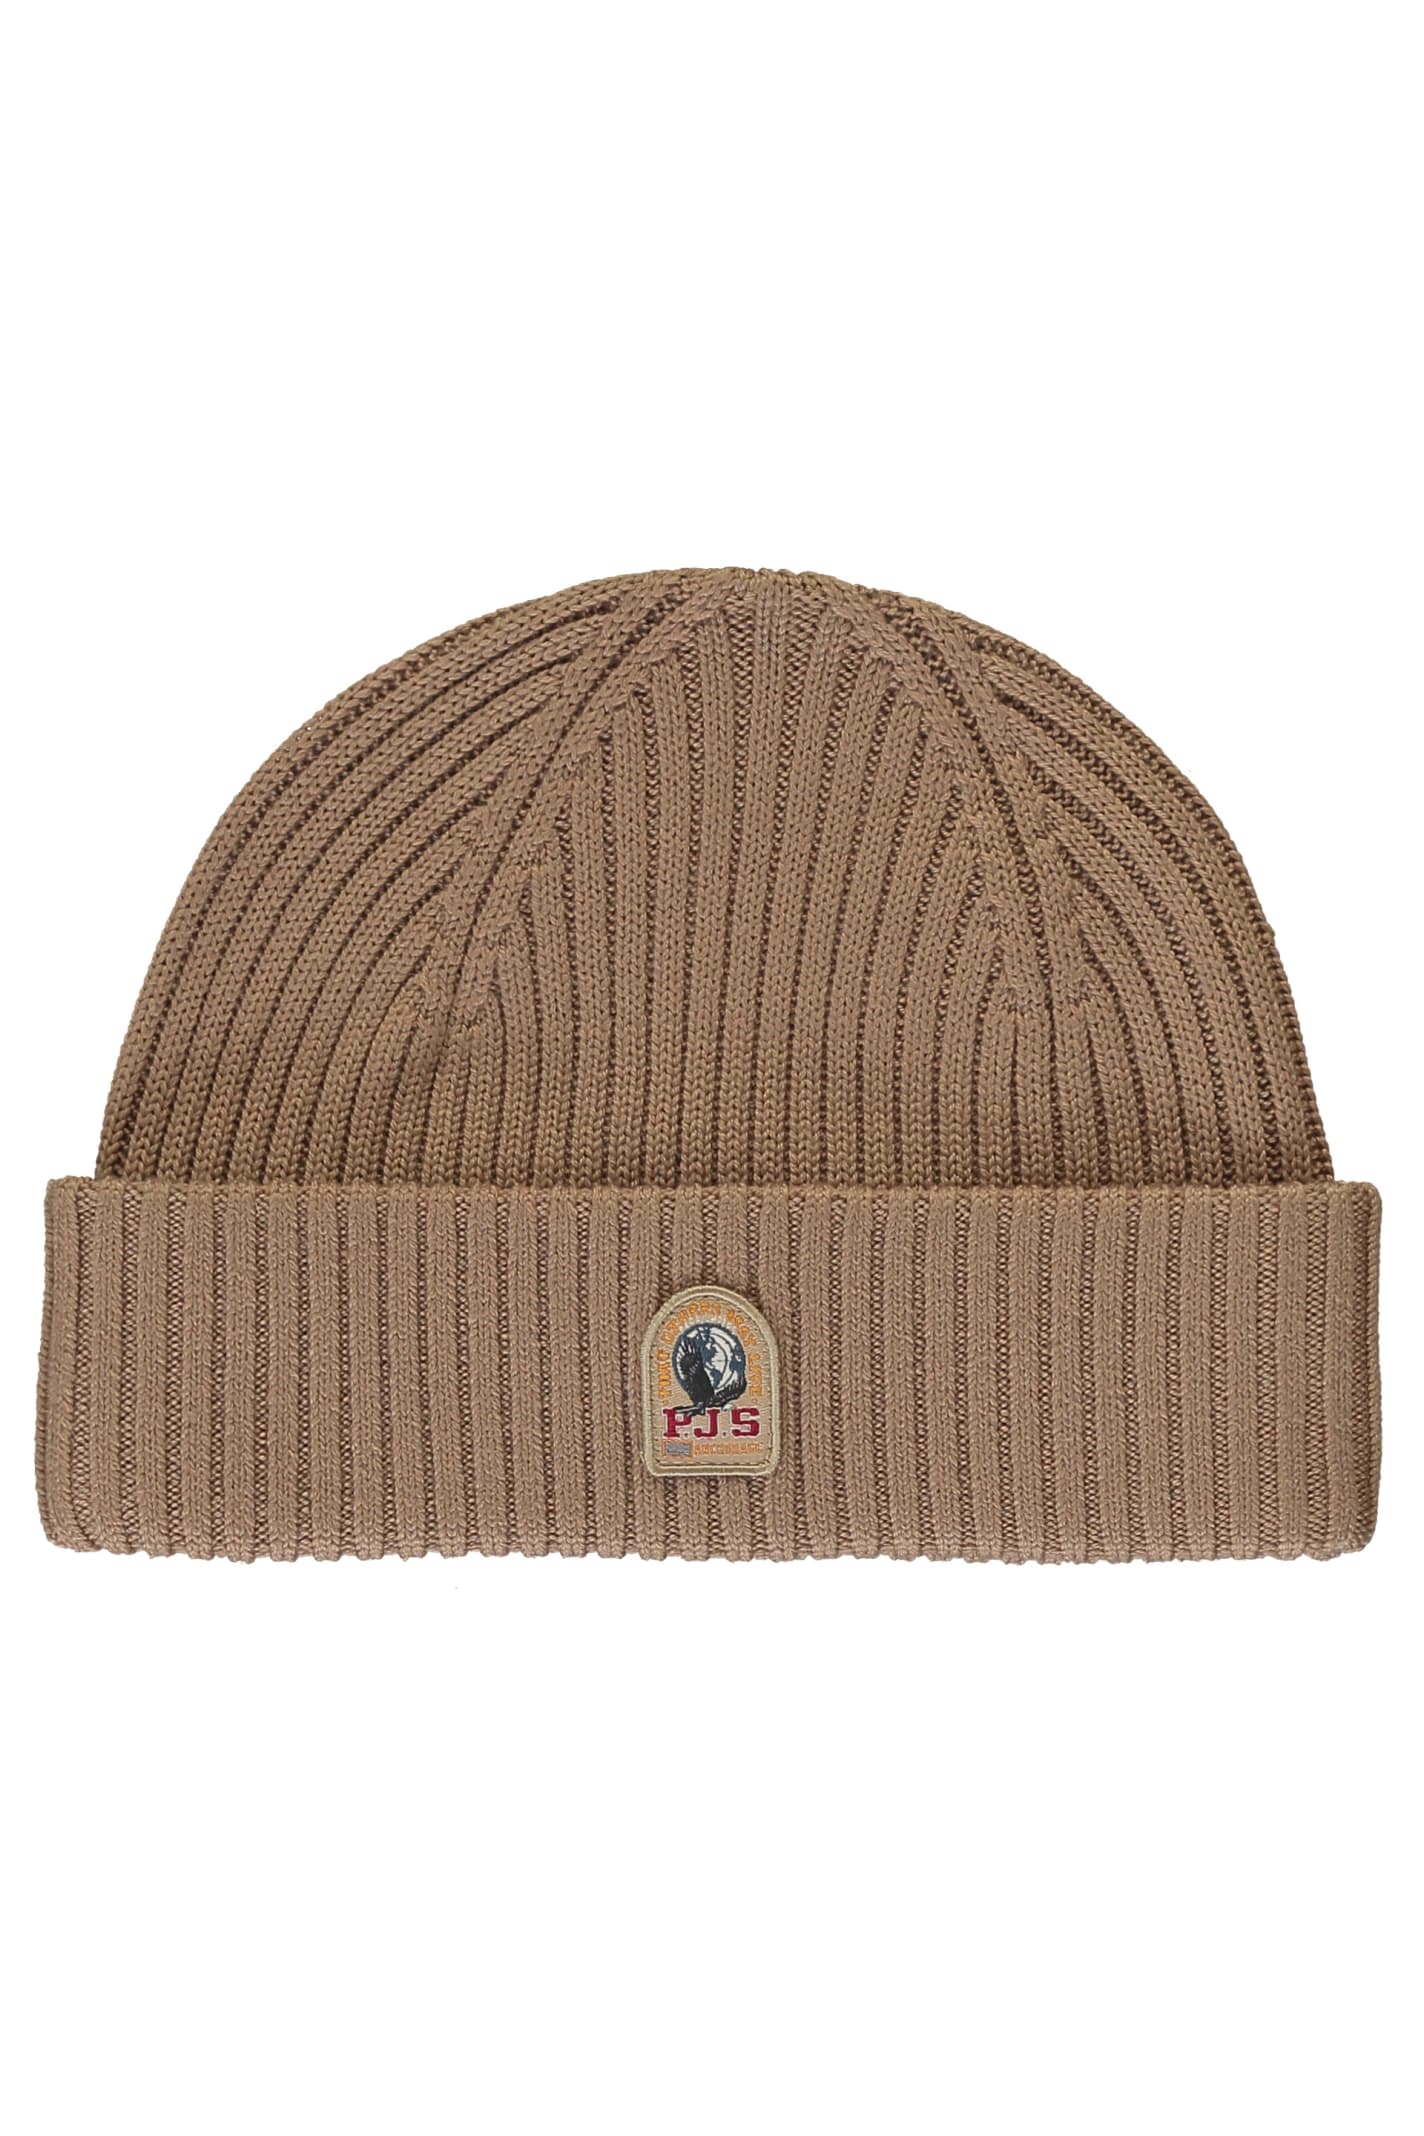 Parajumpers Ribbed Knit Beanie - Beige - male - Size: Large